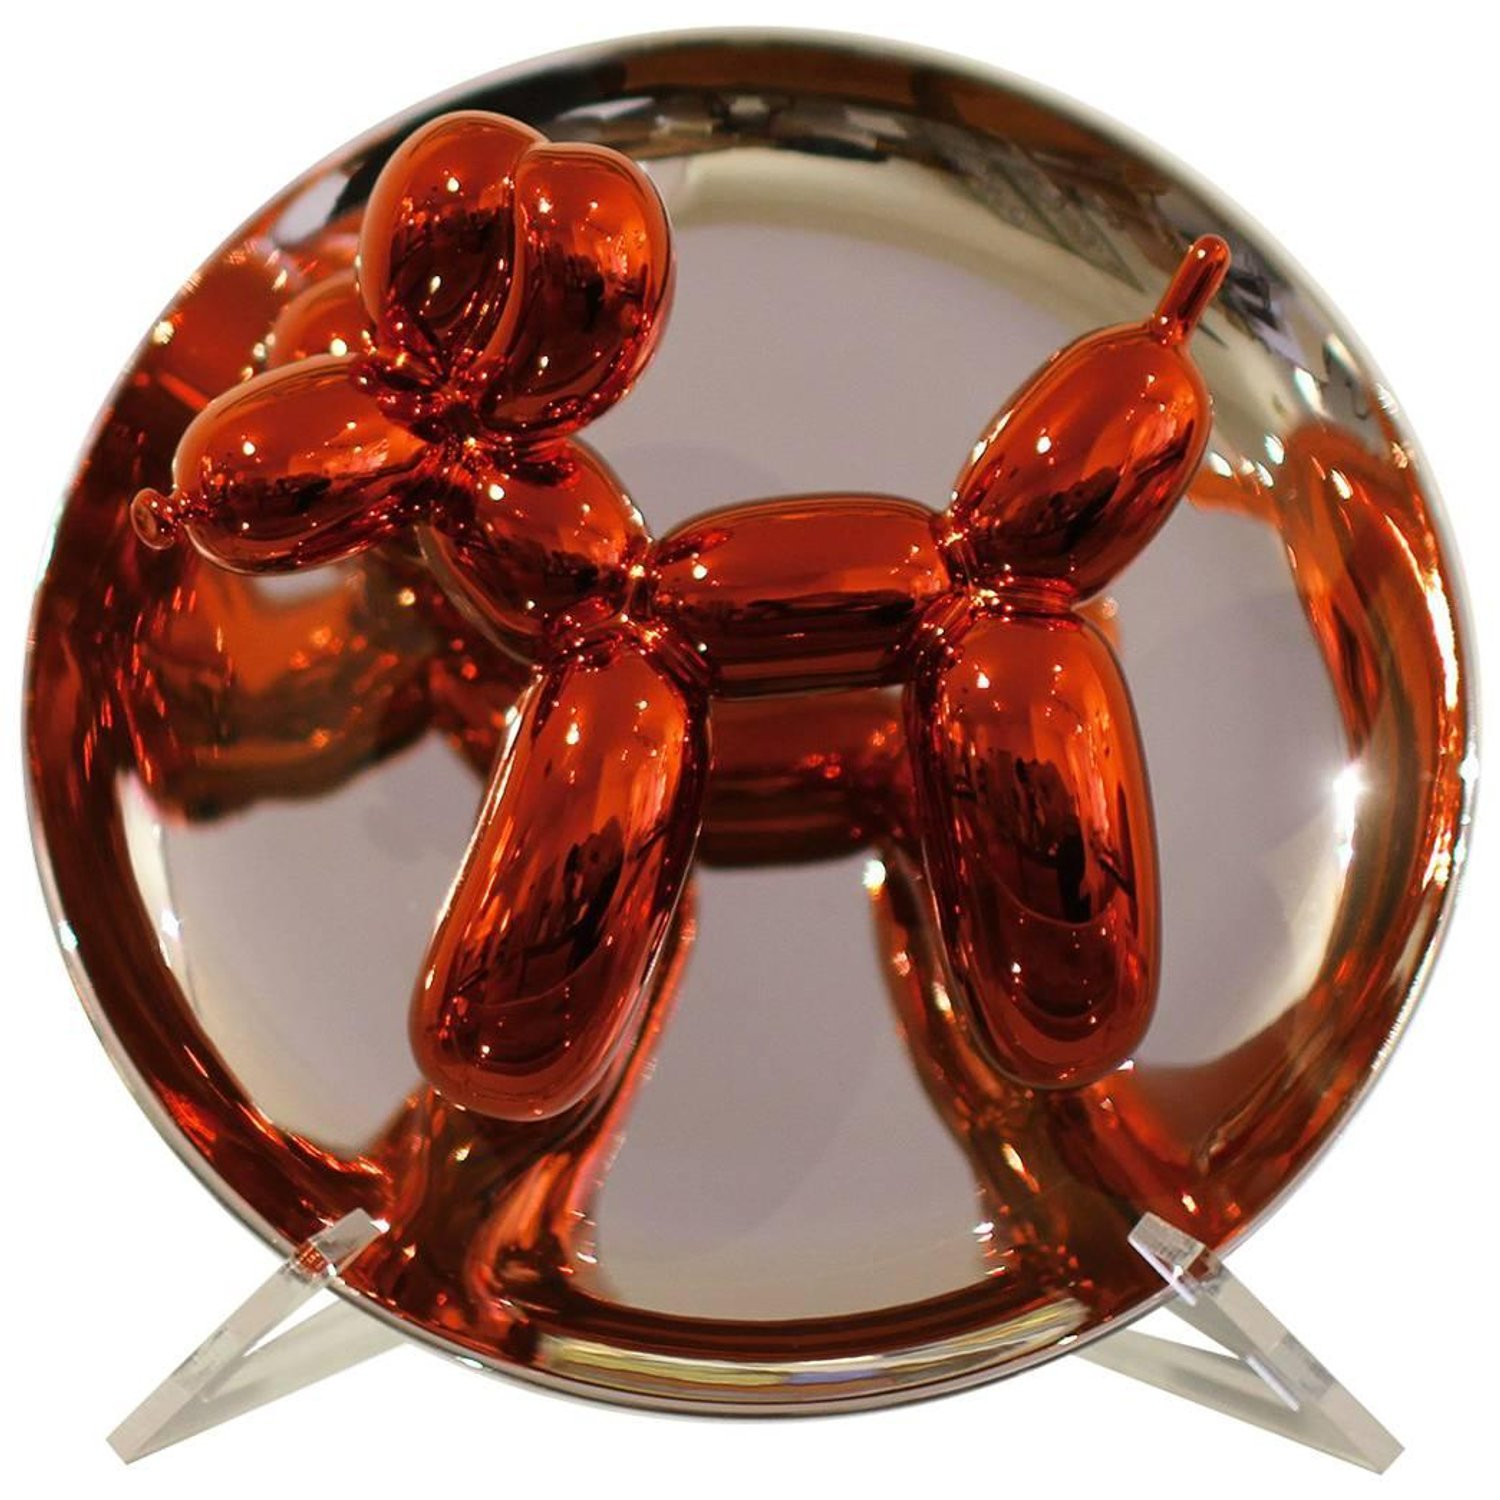 jeff koons puppy vase price of jeff koons furniture 12 for sale at 1stdibs intended for jeff koons balloon dog